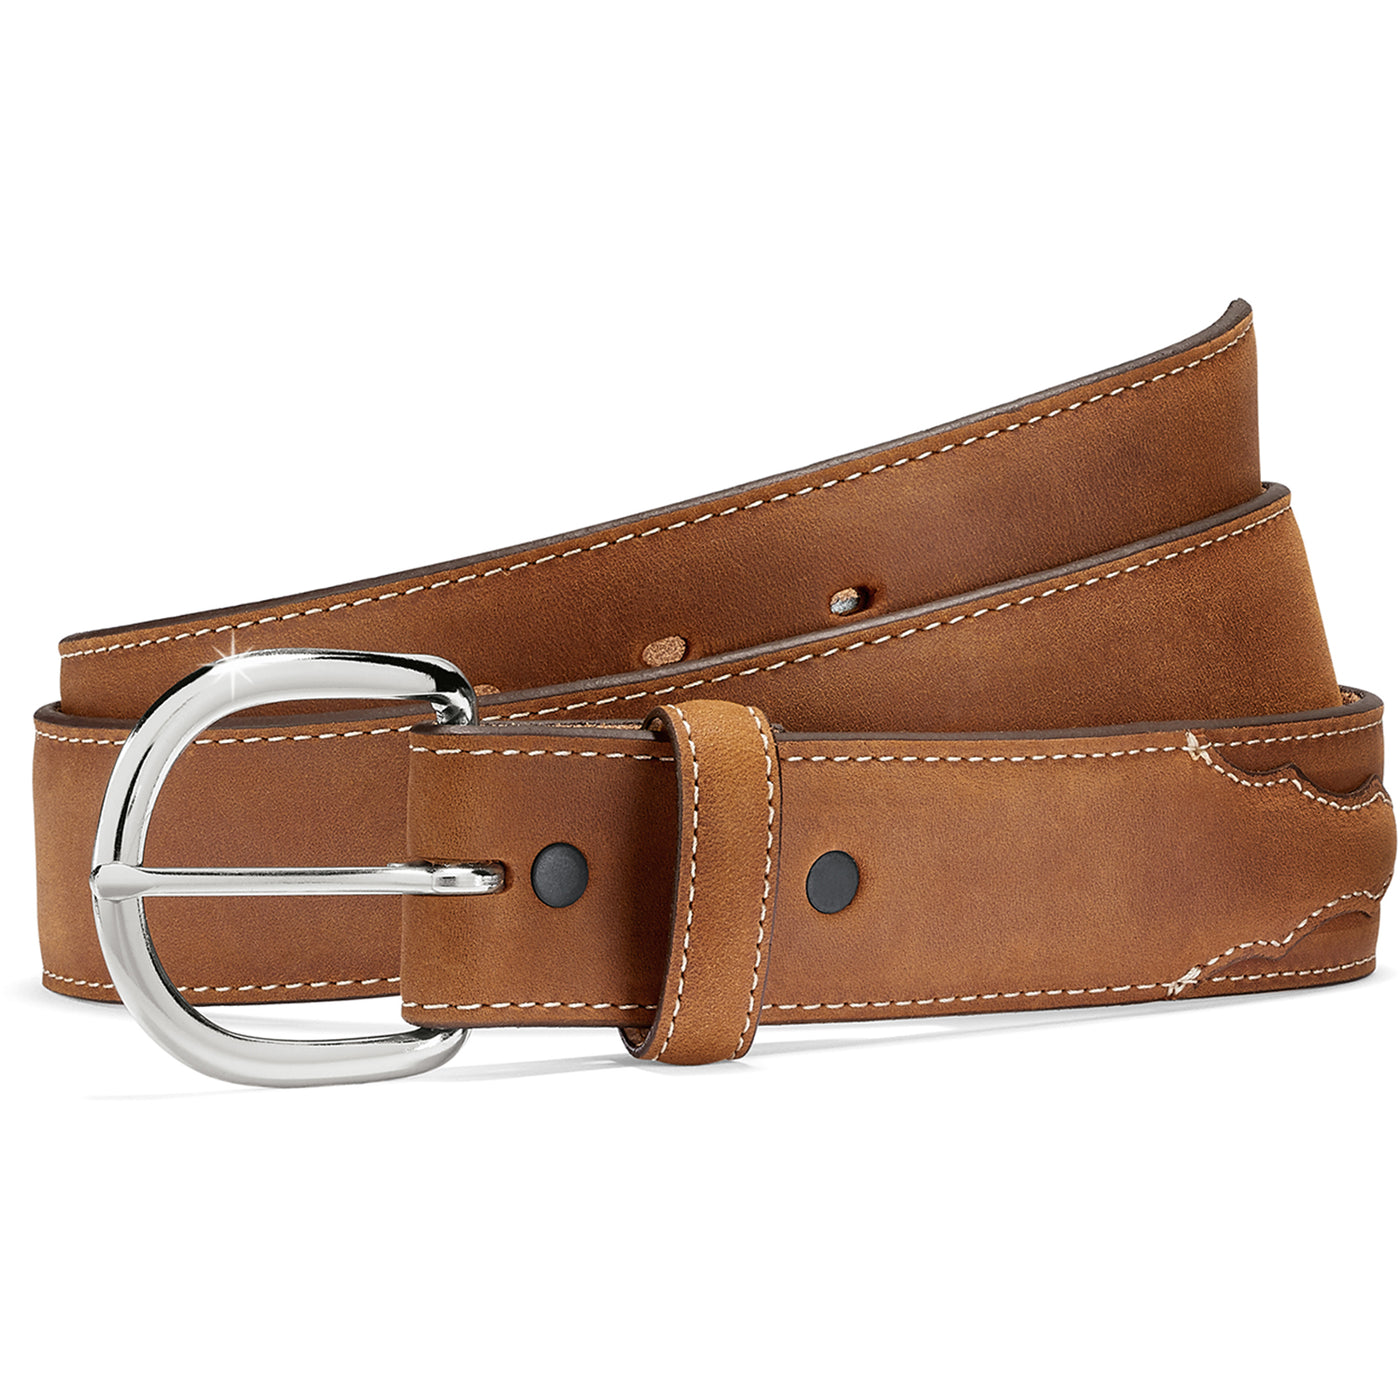 This fine brown leather belt by Justin is made from layered leather without added fillers. It is made from lighter brown leather and is 1 3/8" wide.  The Billet ends have layered decorative edge sewn in place, white stitching is along edges of layers and edges of belt. A changeable chrome colored brass buckle with rounded edge for closure. Available in our retail shop in Smyrna, TN, just outside Nashville. Handcrafted in USA from imported materials. Available in sizes 34"-46".